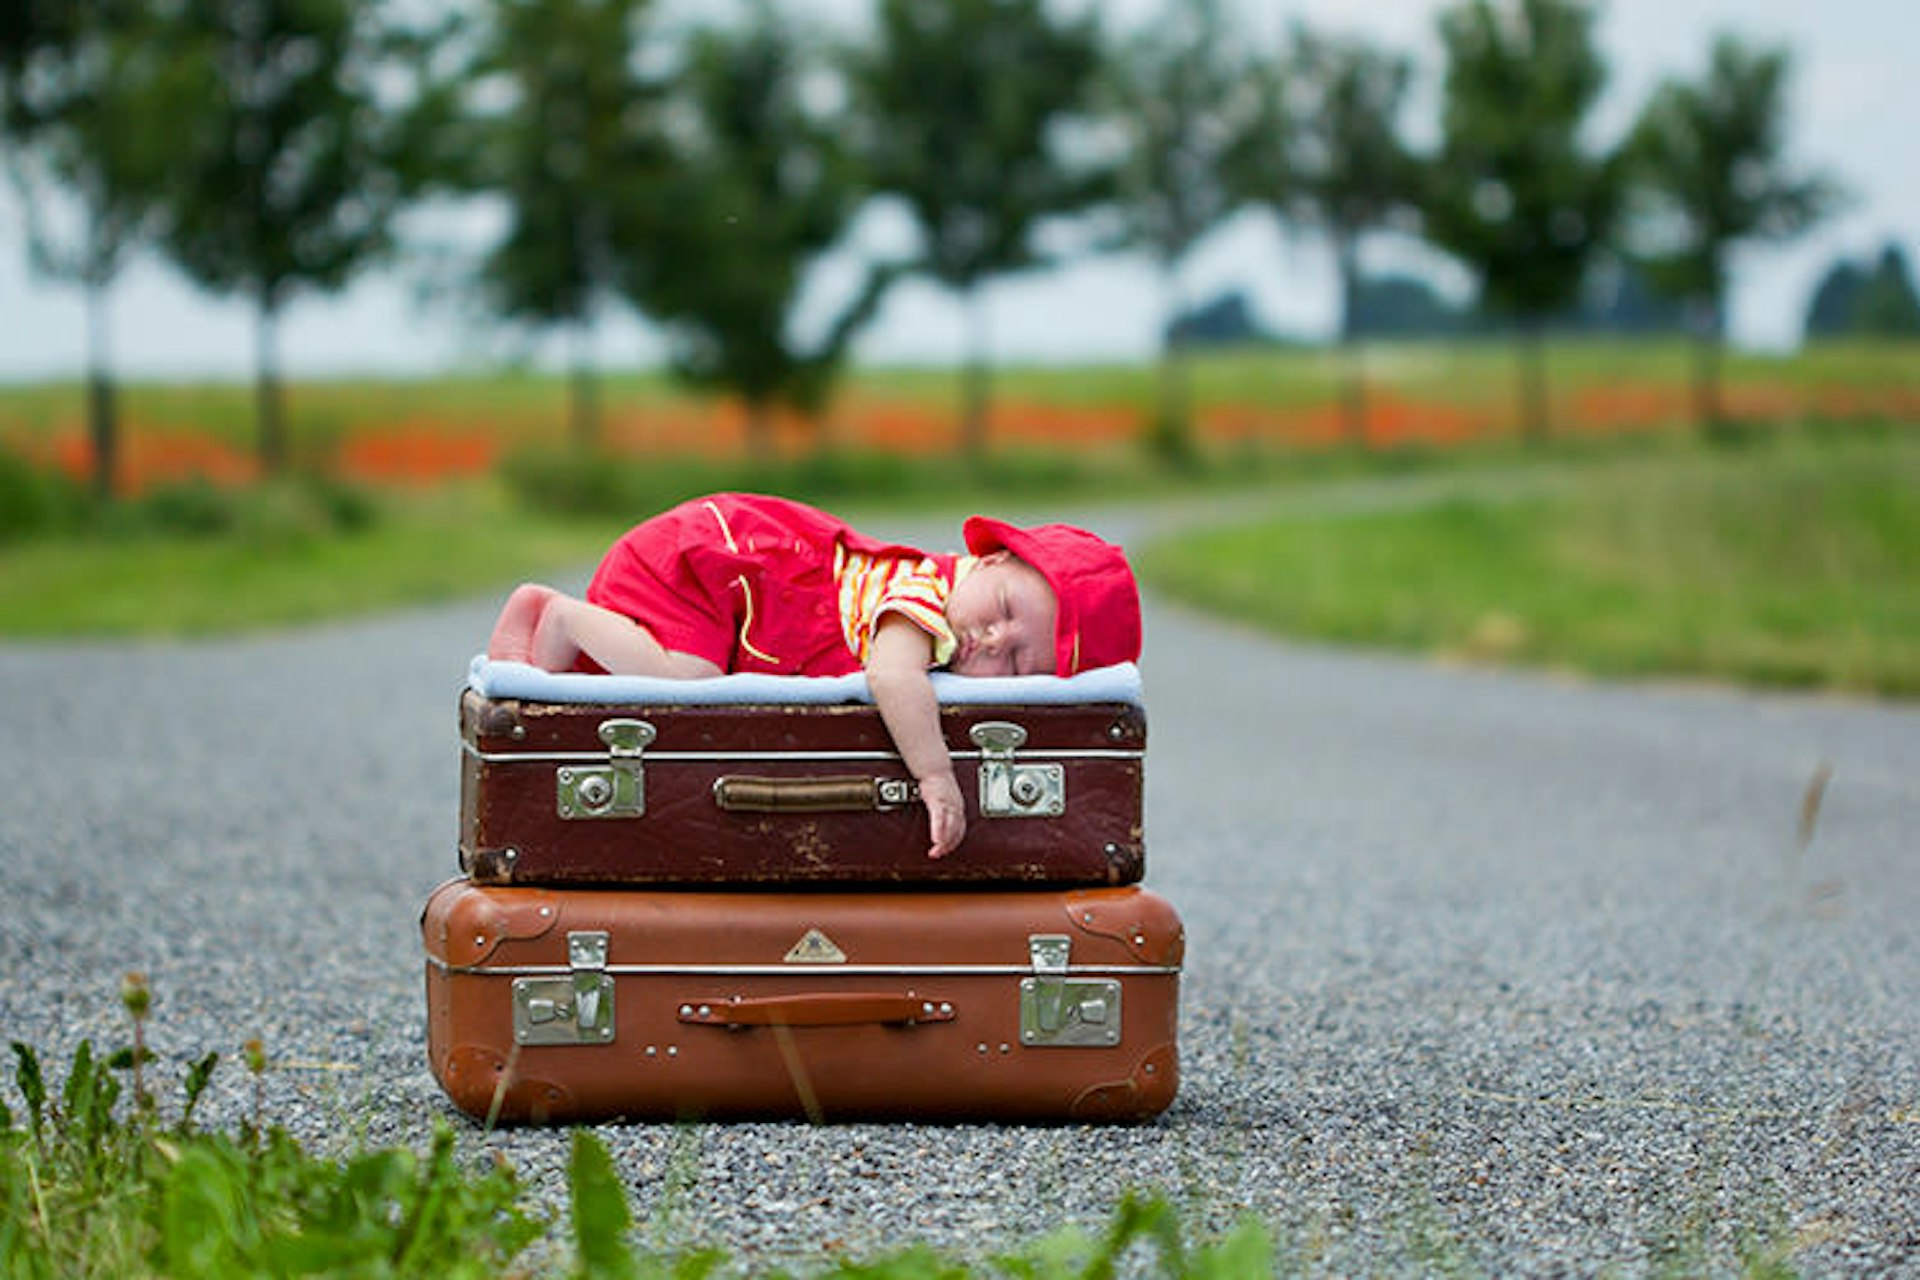 OK, occasionally - just occasionally - two suitcases come in handy...but as a rule? No. Image by Tatyana Tomsickova Photography / Moment / Getty Images